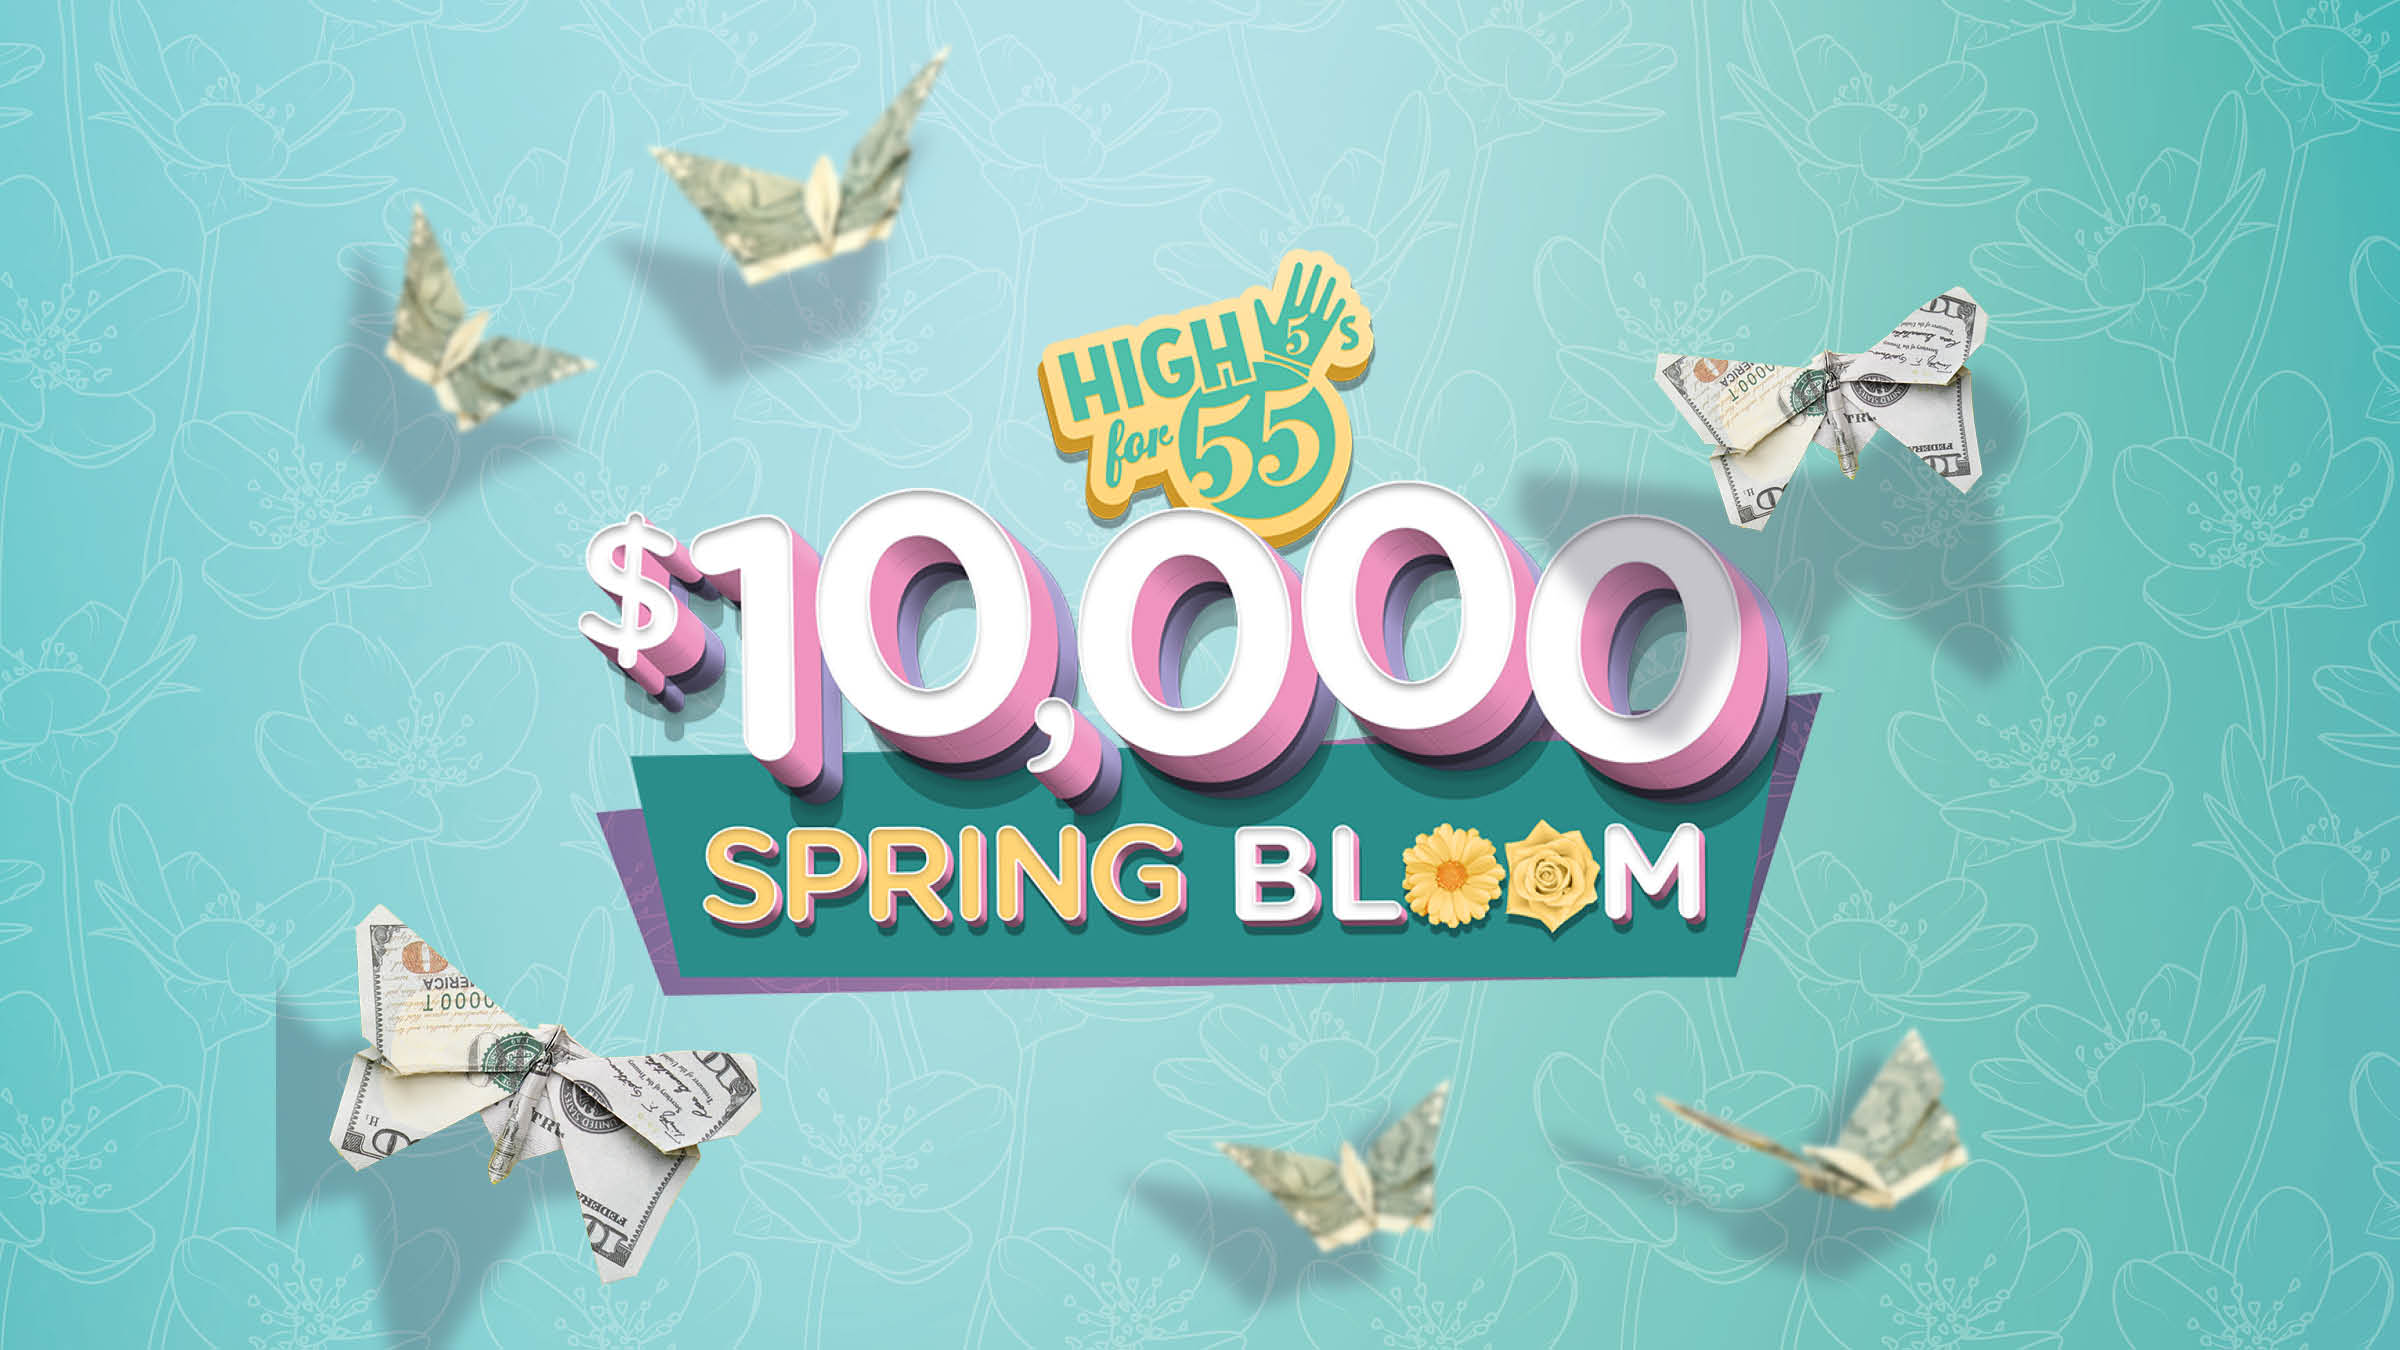 High 5s for 55’s – $10,000 Spring Bloom